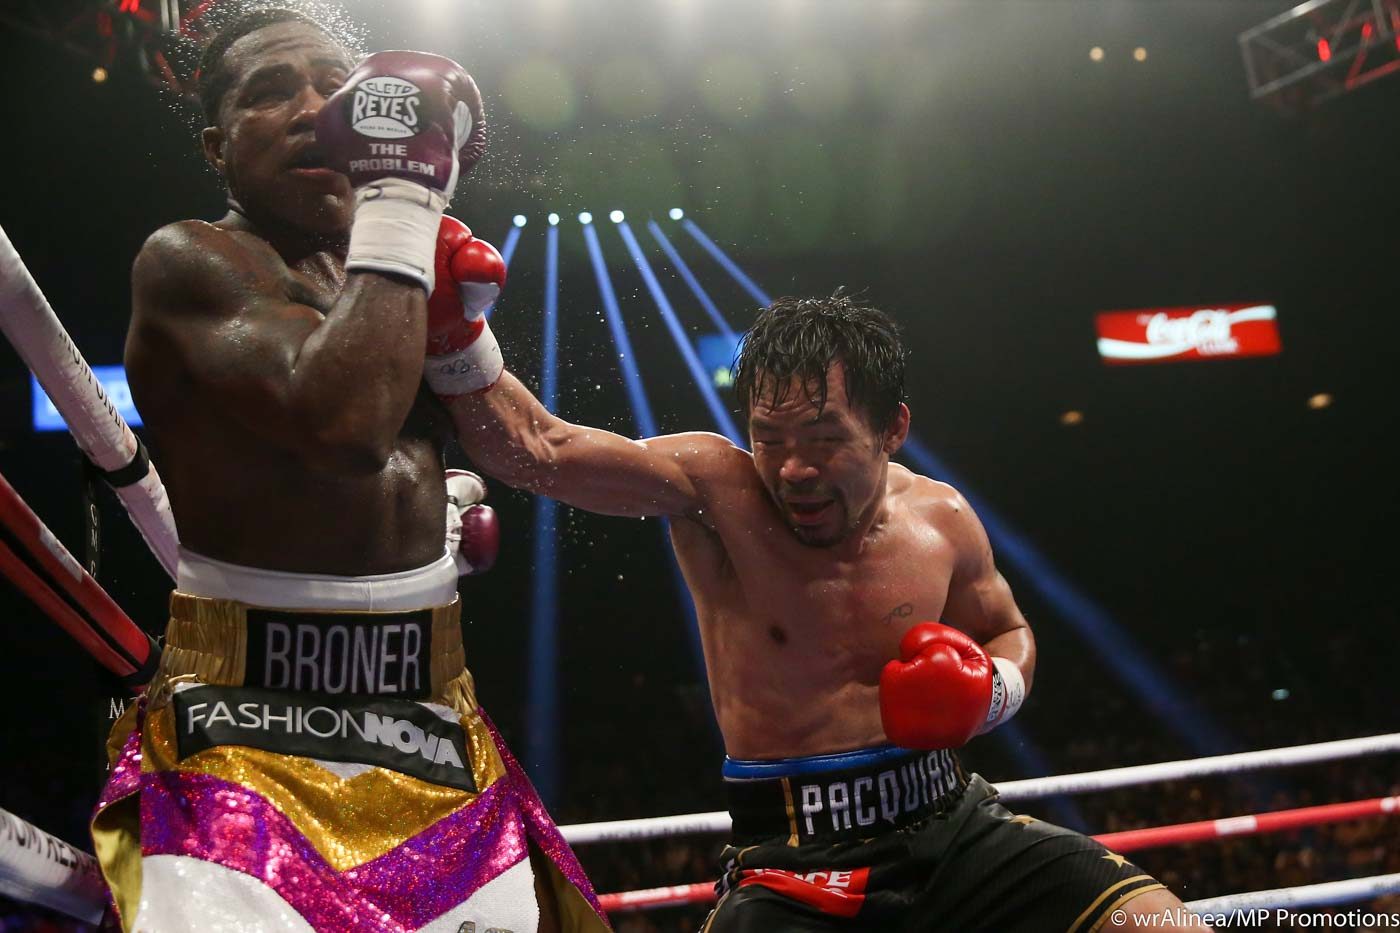 STILL FIERY. Manny Pacquiao throws a right to Adrien Broner during their WBA welterweight championship bout in Las Vegas, Nevada, on January 20, 2019. Photo by Wendell Alinea/MP Promotions 